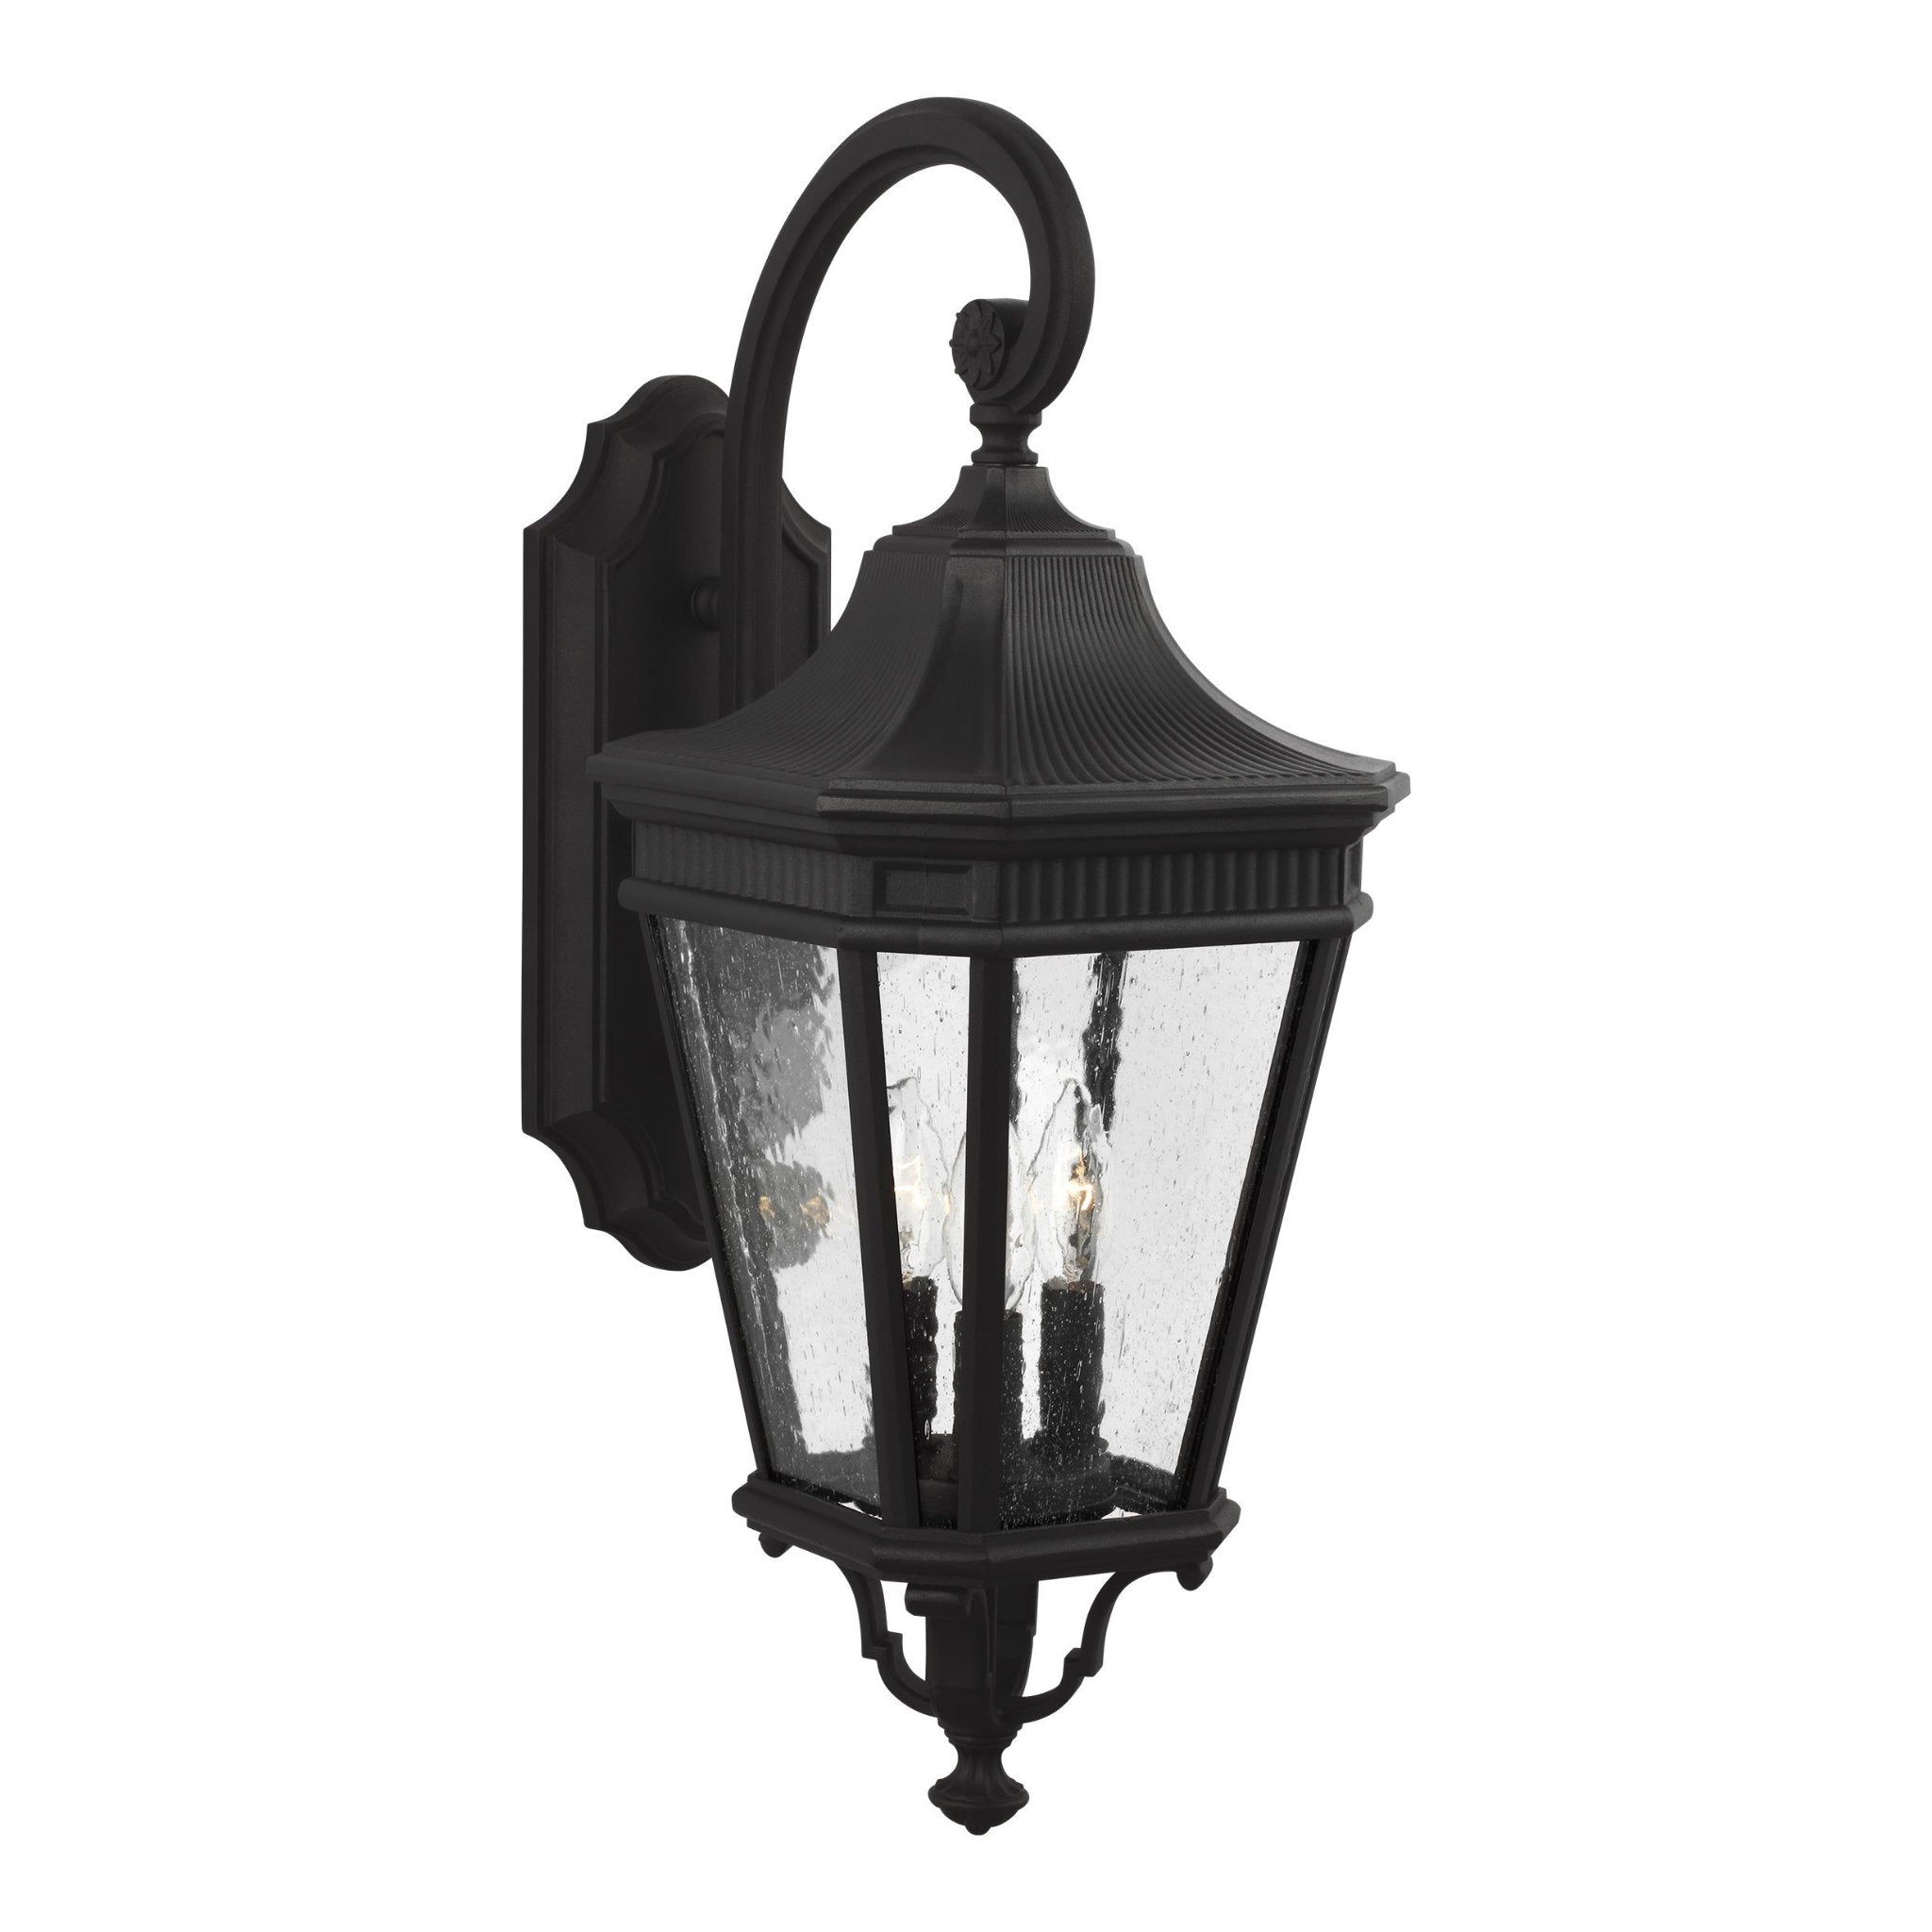 Cotswold Lane Medium Lantern Traditional Outdoor Fixture 9.5" Width 23.75" Height Aluminum Irregular Clear Seeded Shade in Black